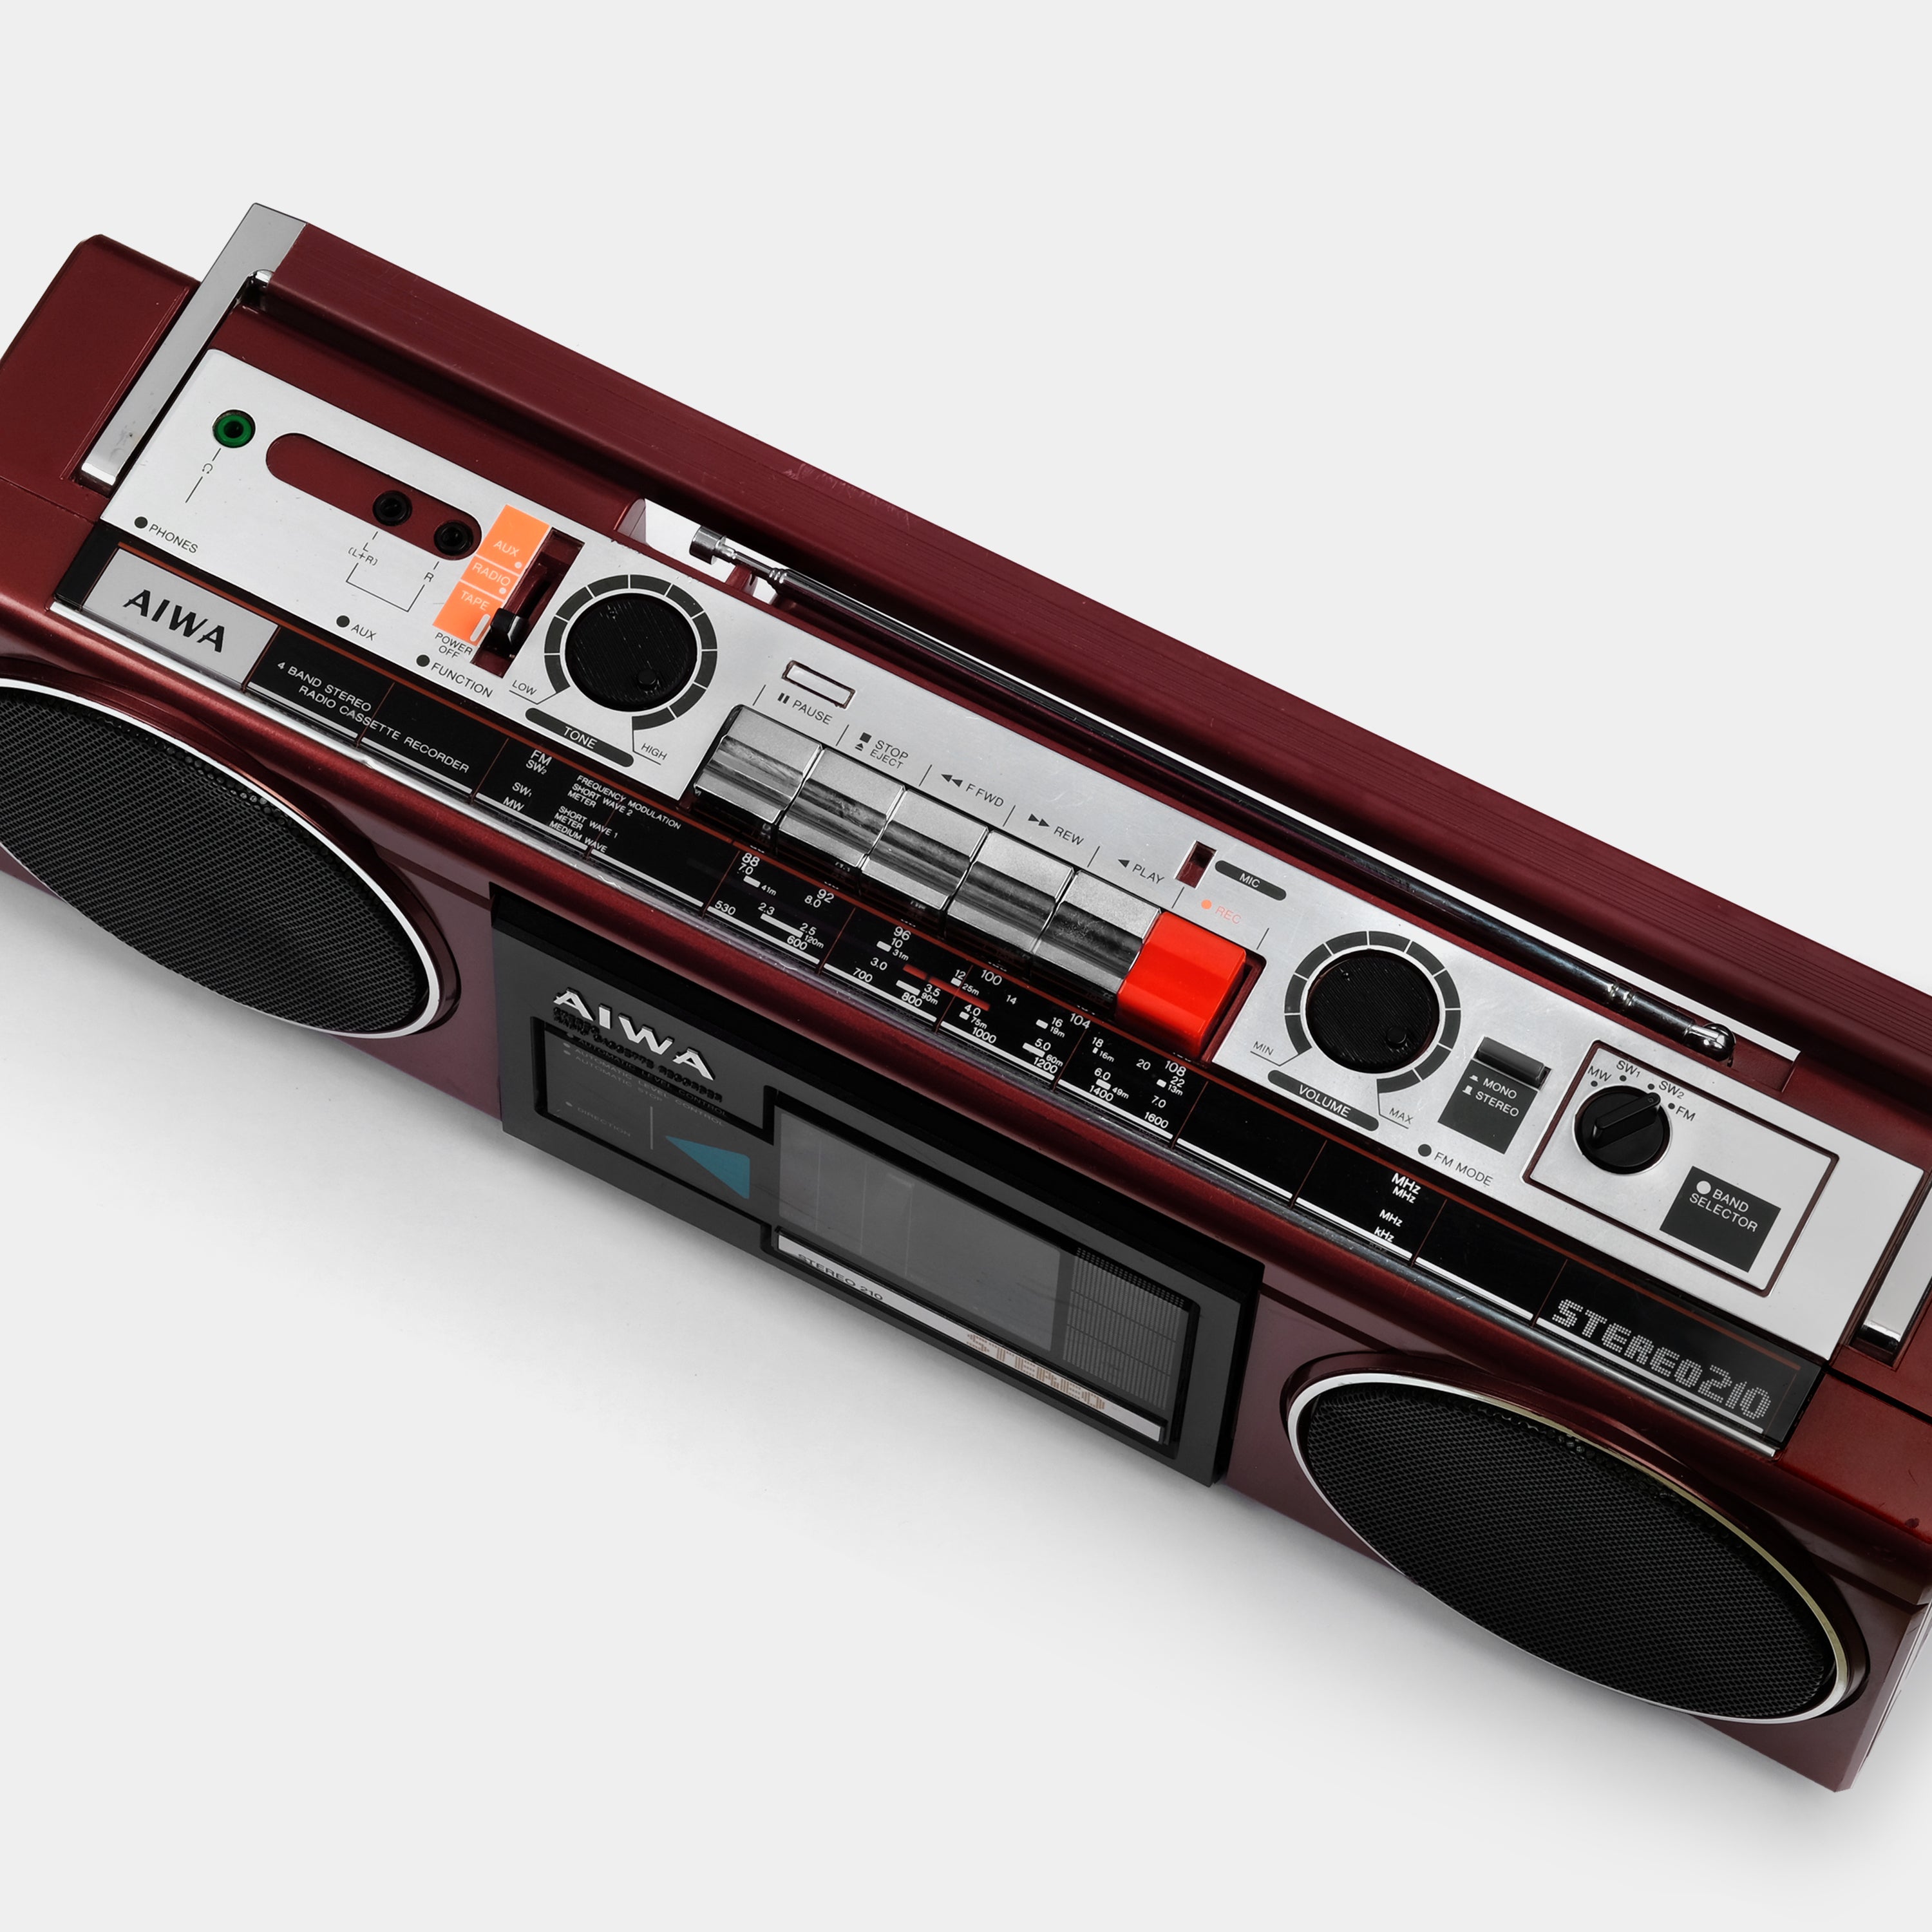 Aiwa Stereo 210 CS-210U AM/FM Red Boombox Cassette Recorder and Player